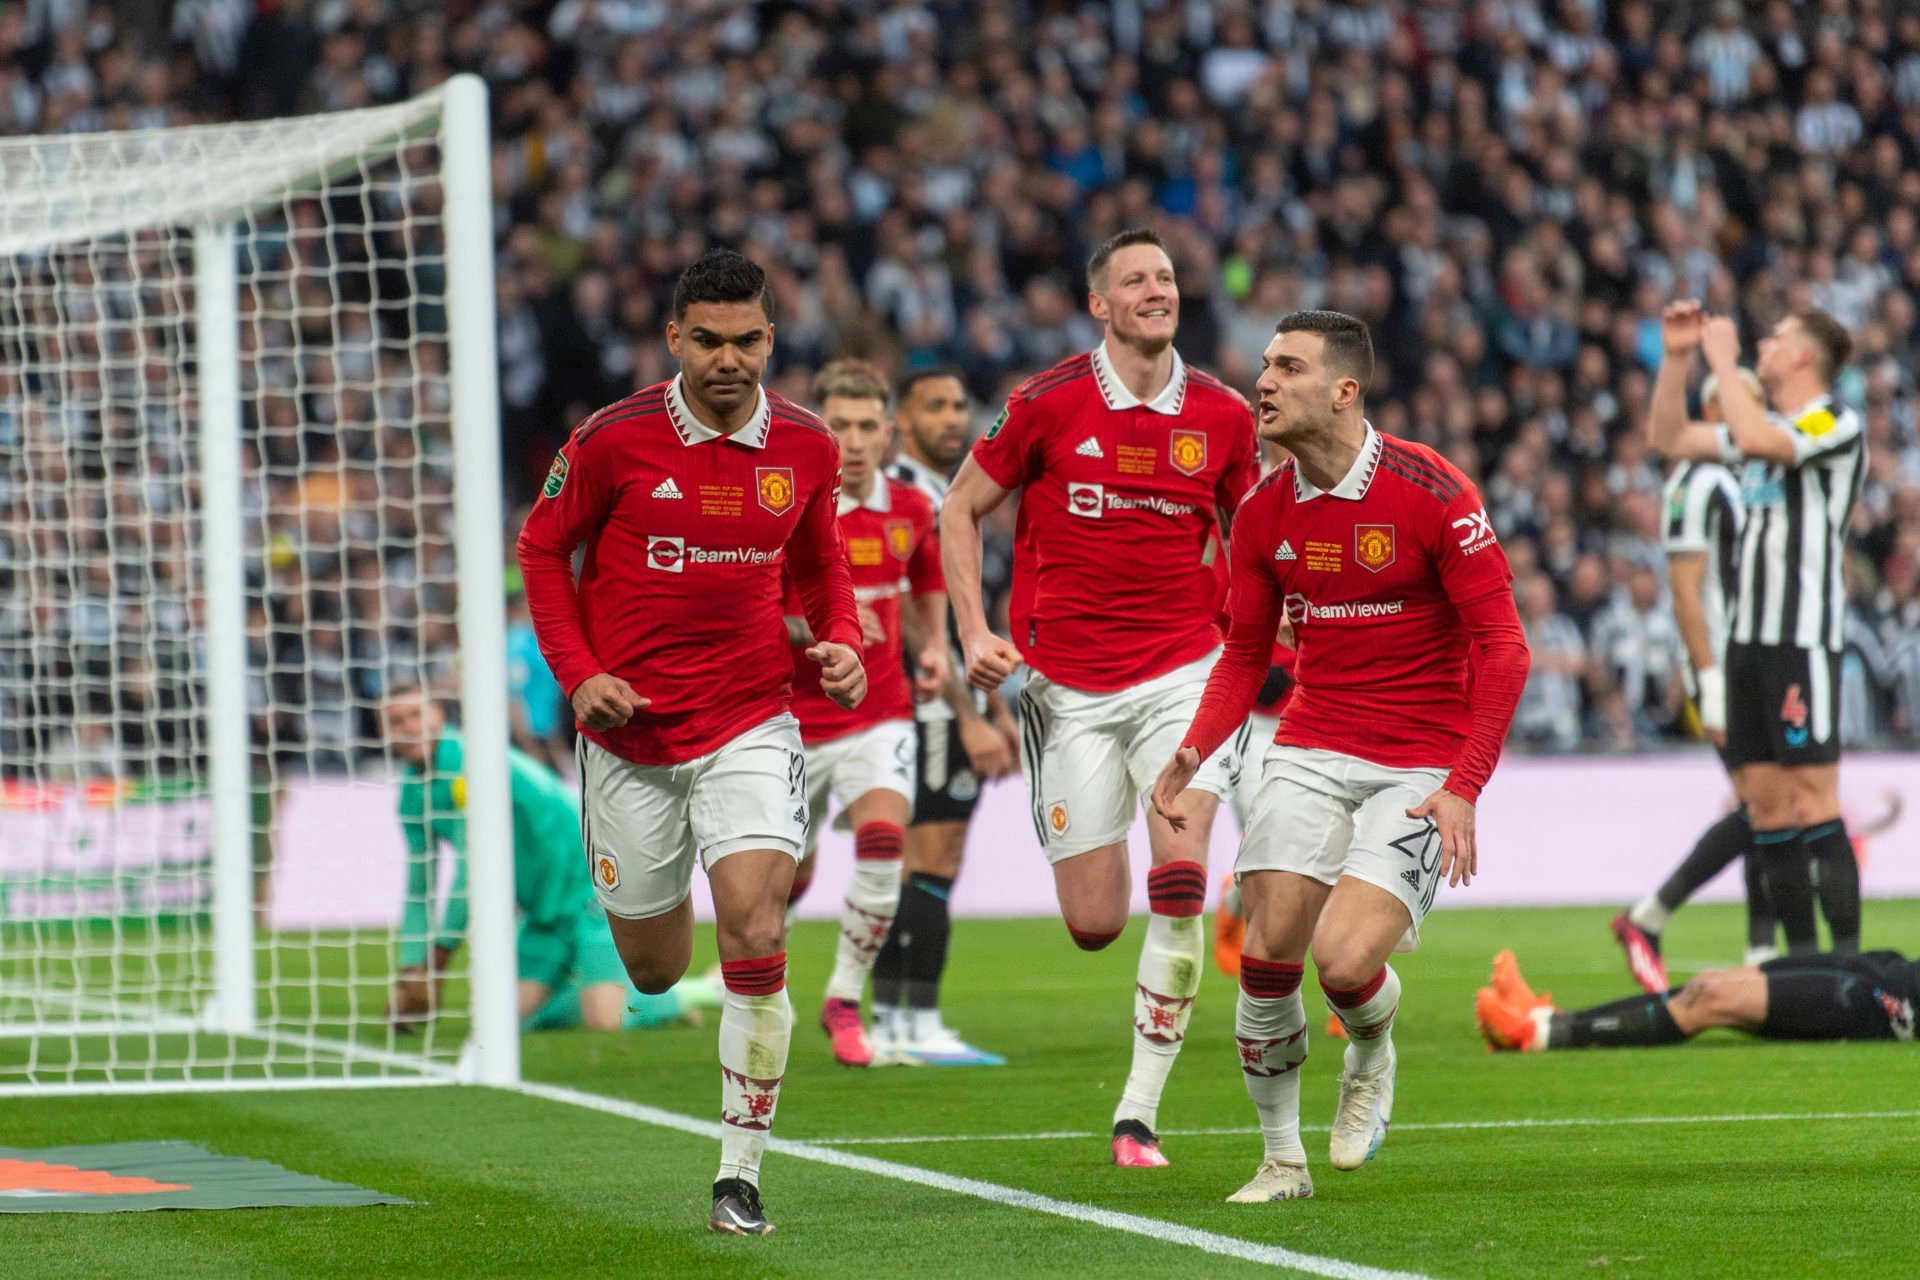 Newcastle United suffer Carabao Cup final defeat to Manchester United